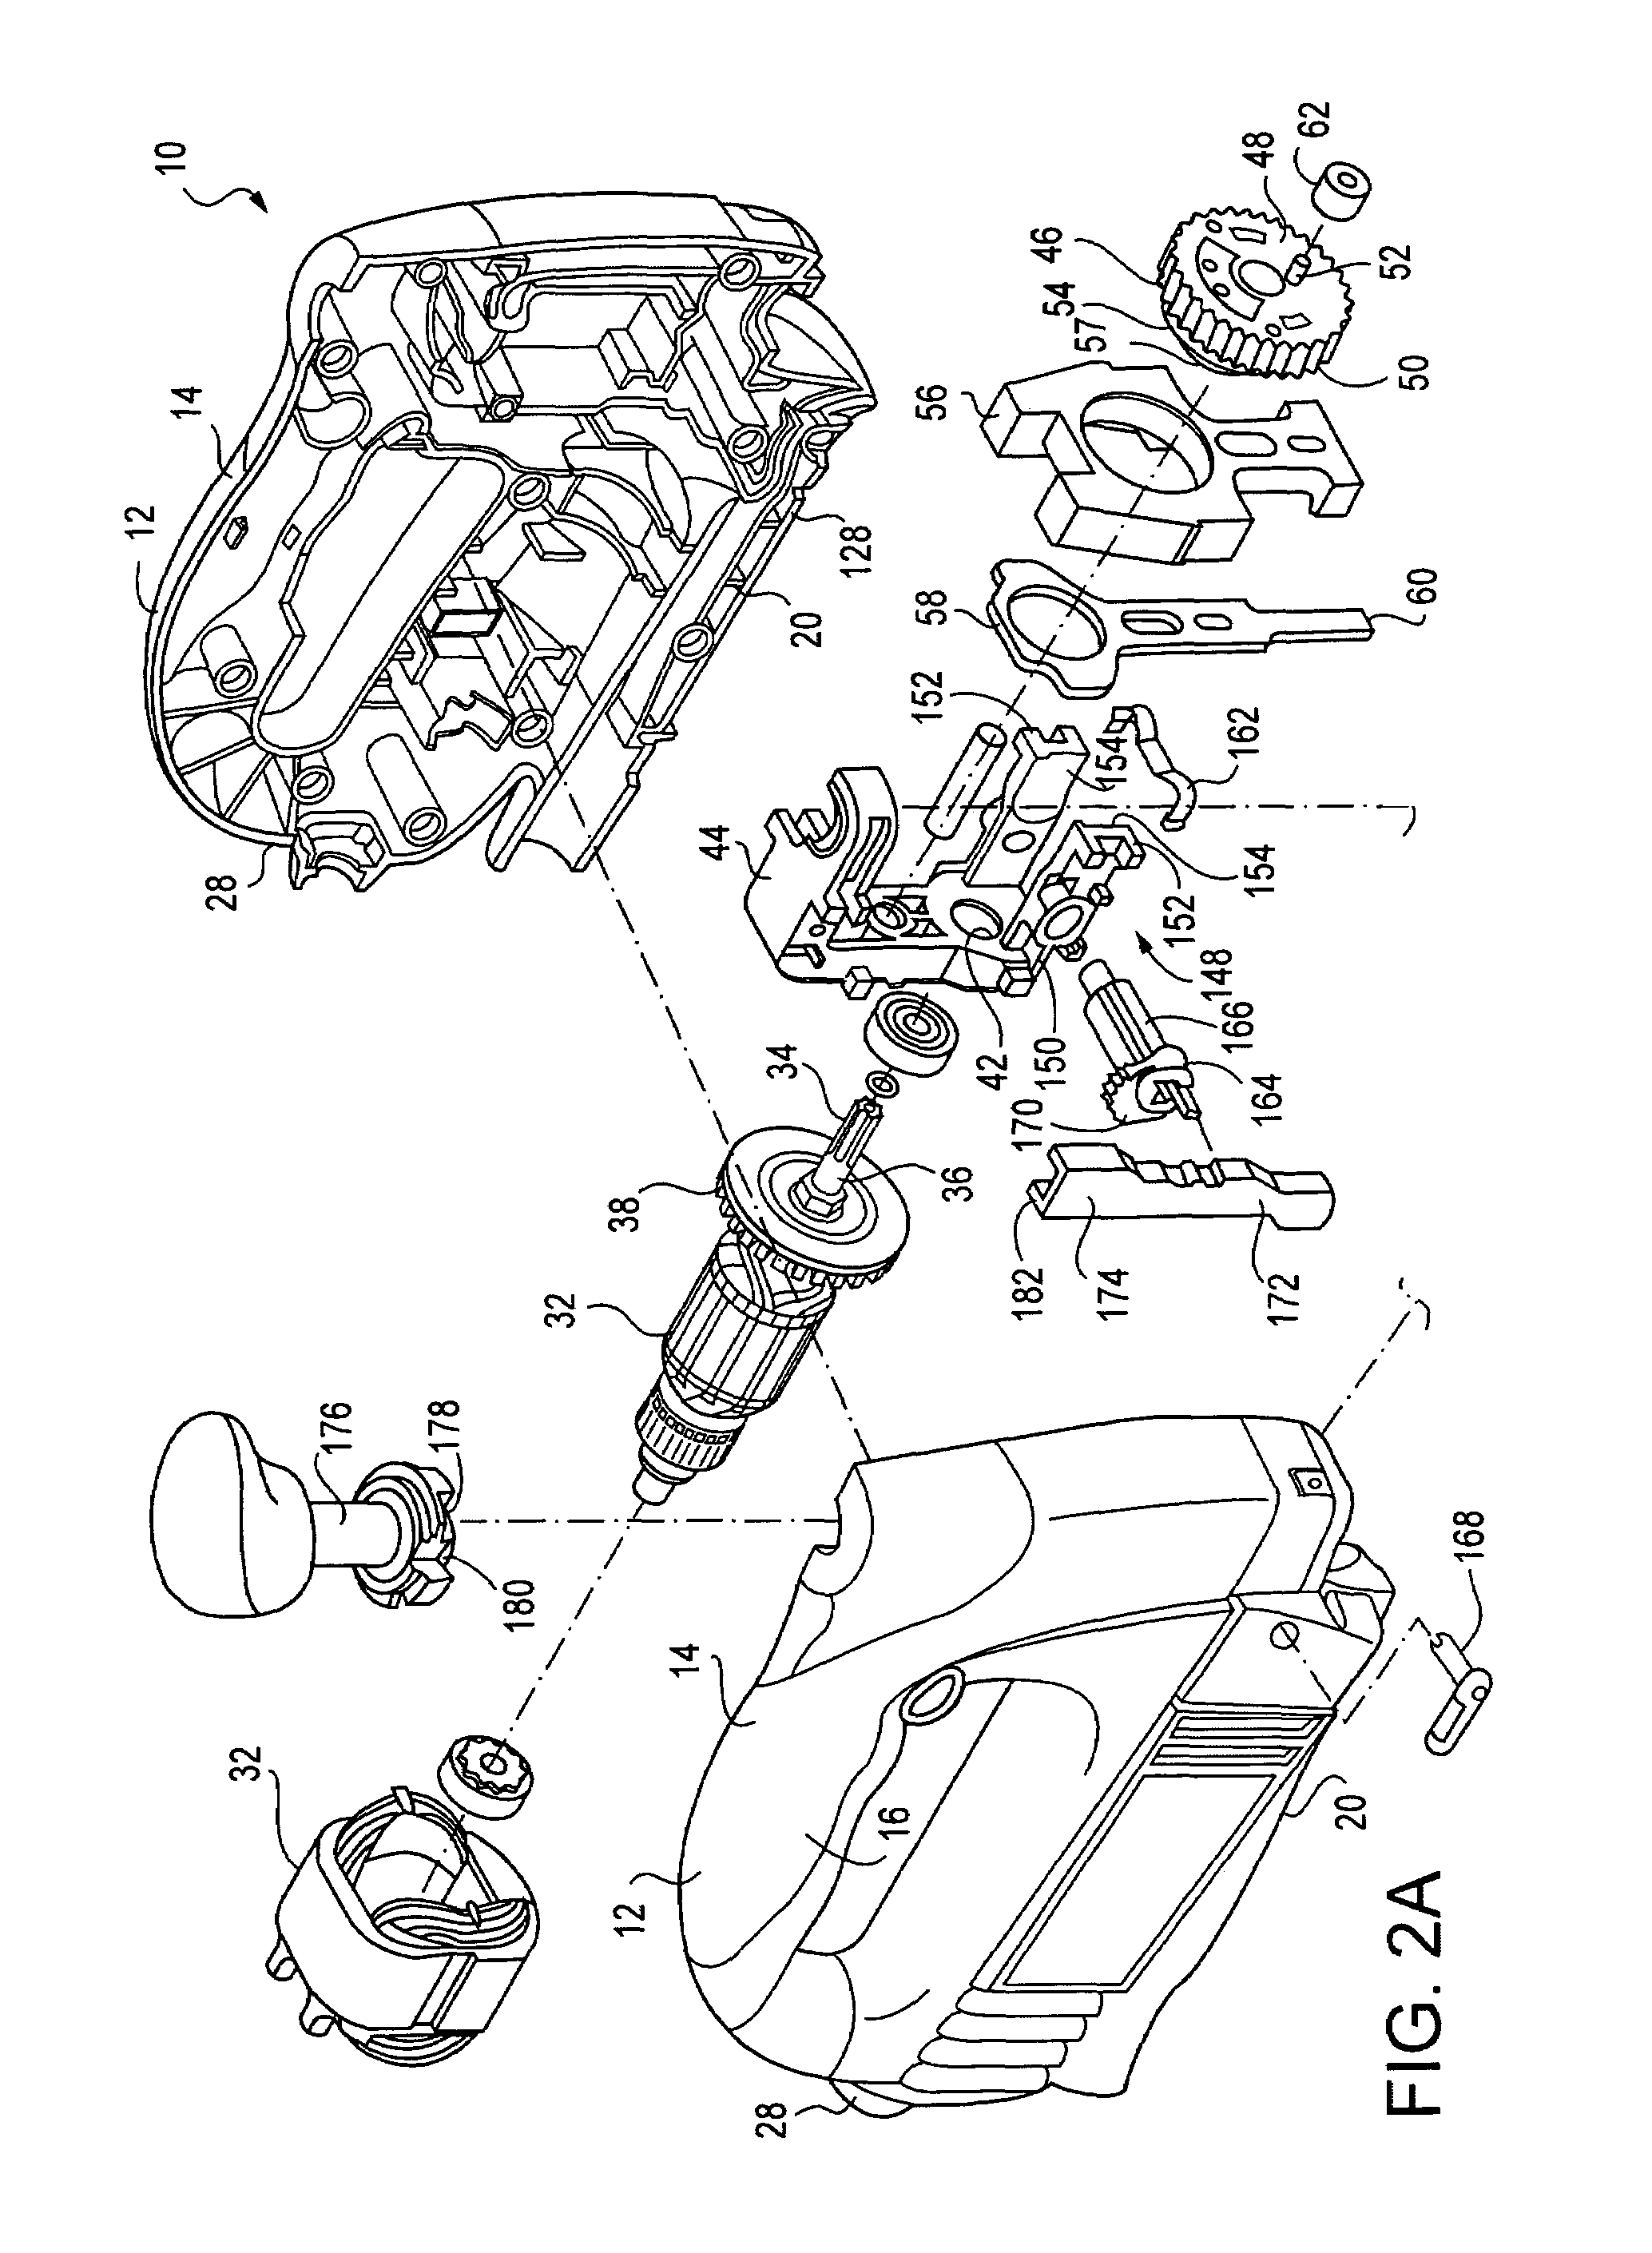 Reciprocating cutting tool with orbital action